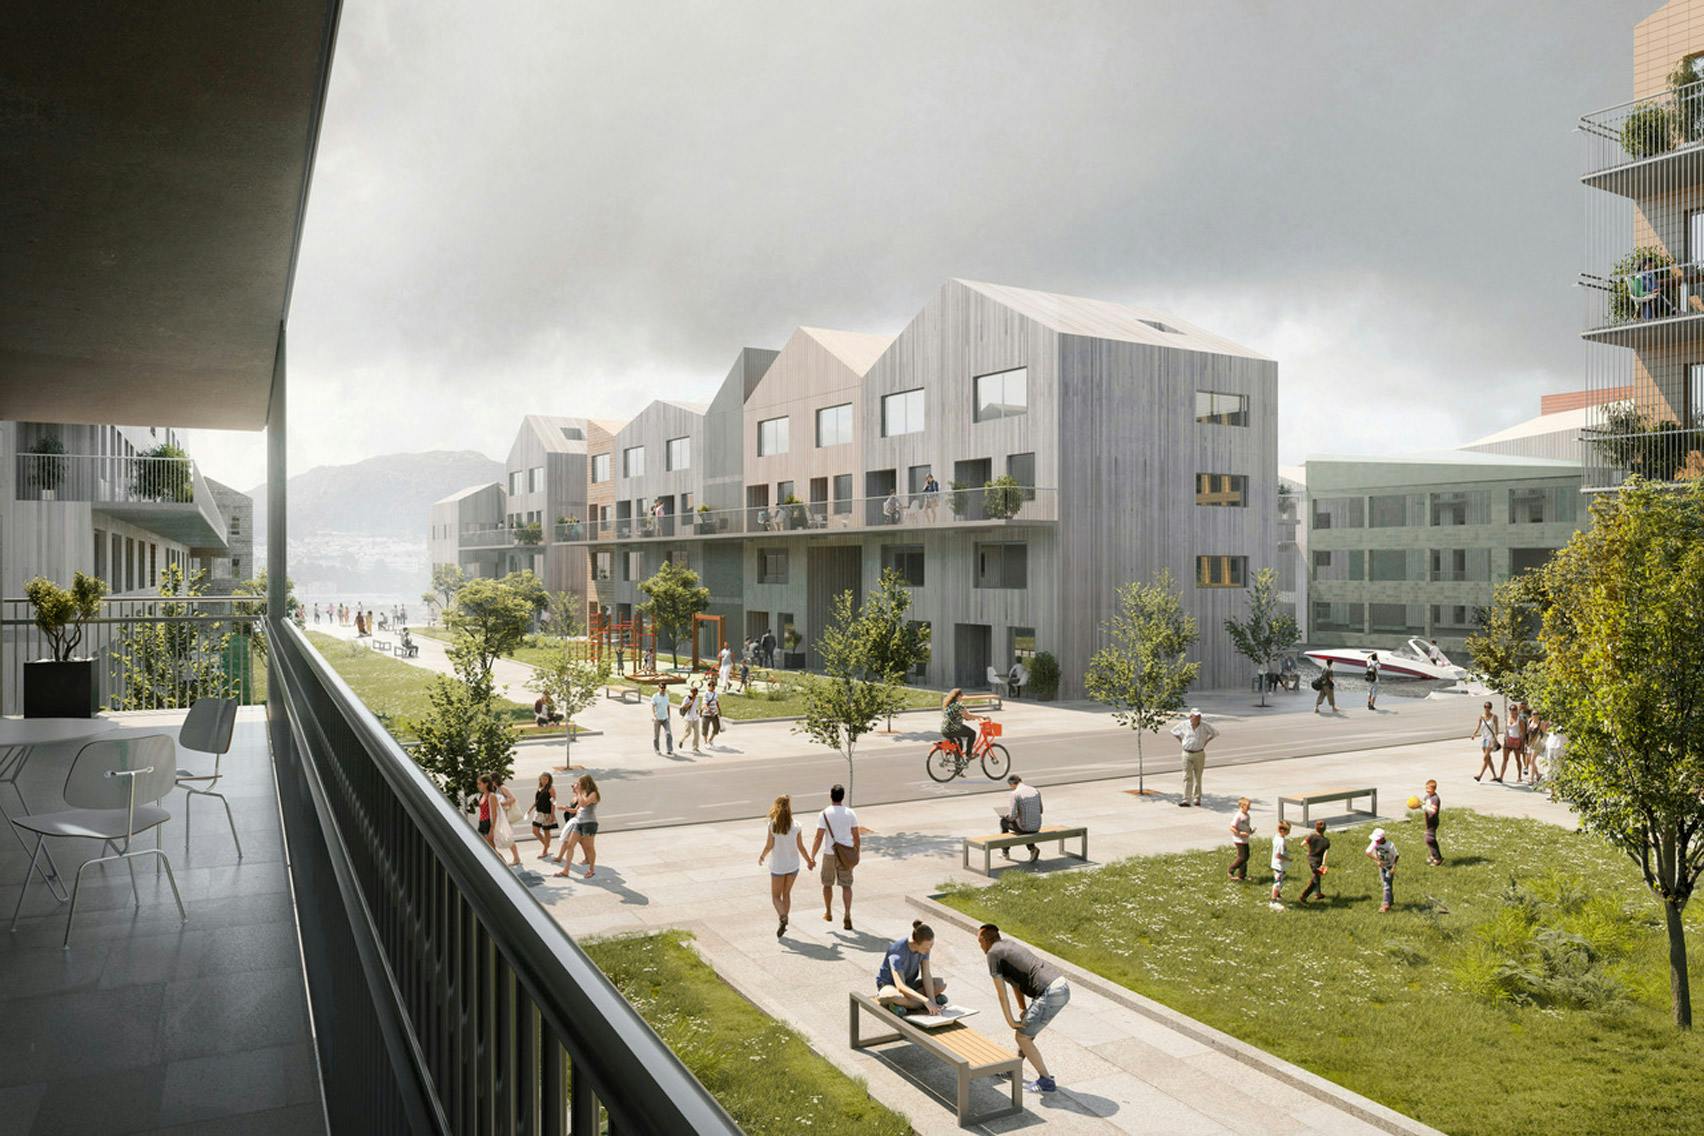 Trenezia is the masterplan for a zero-emission village in Norway; the Equinox Founding Partners were sustainability consultants on this project.